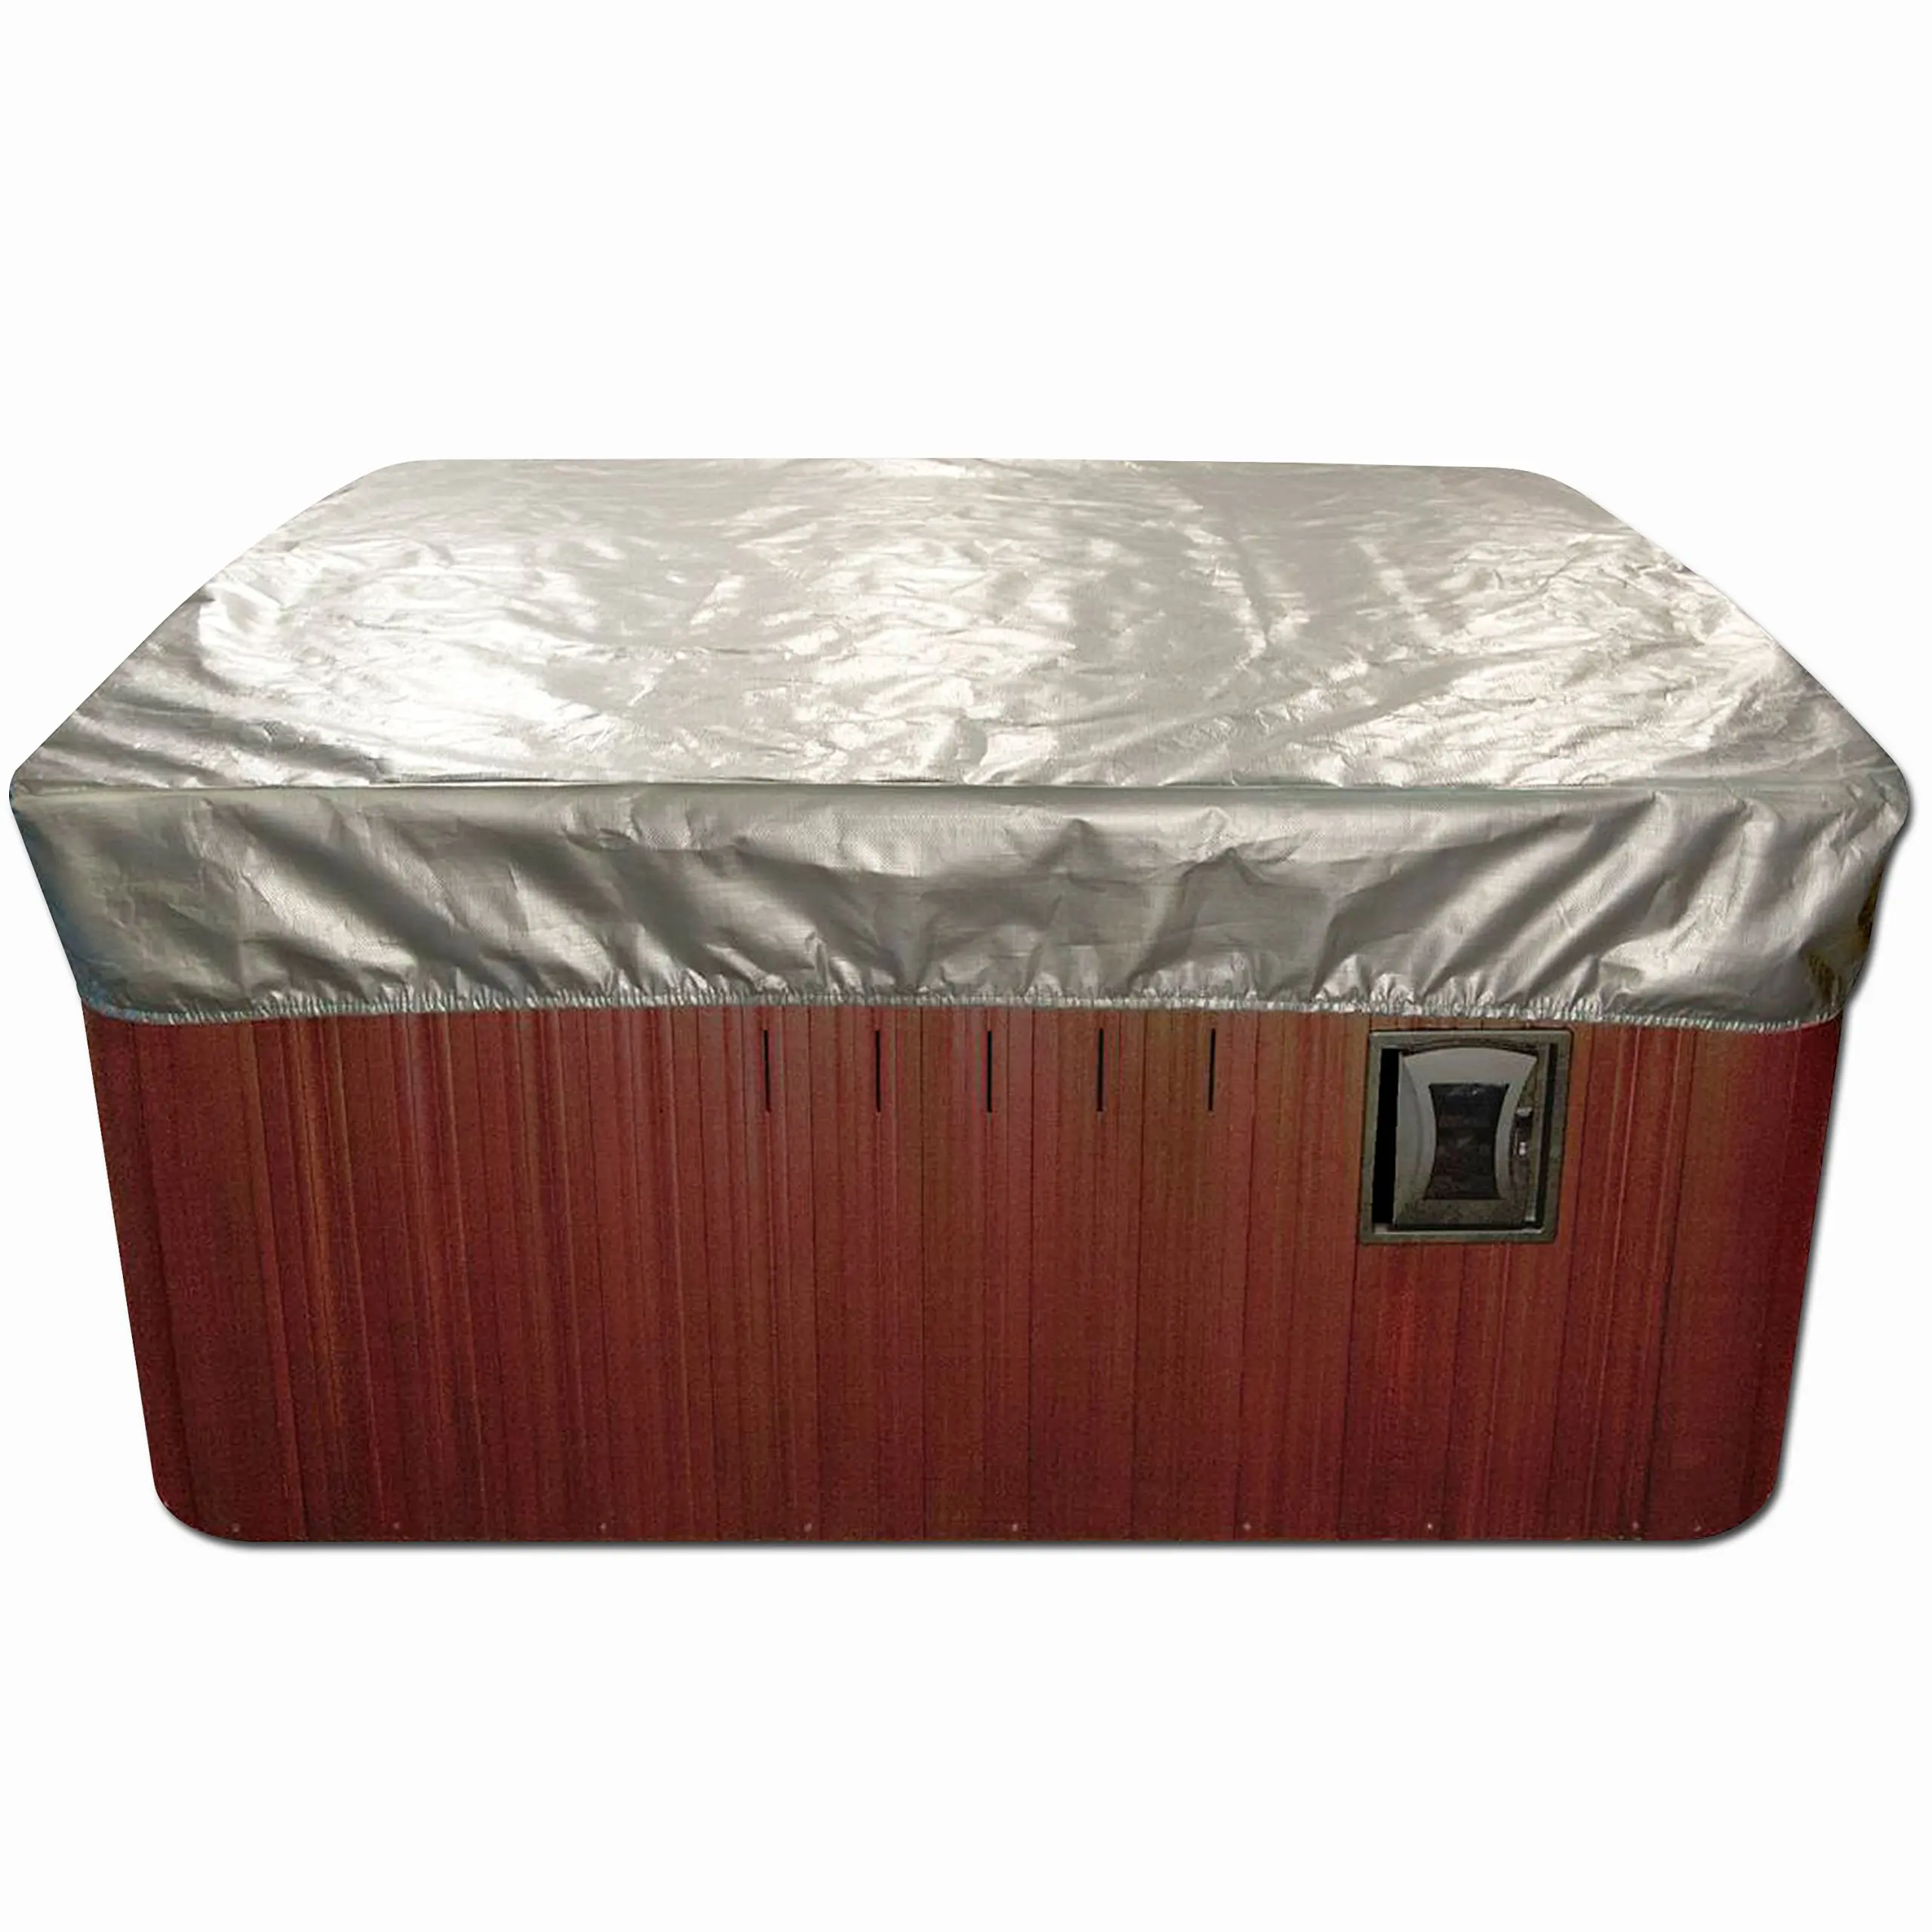 Spa Cover Cap Thermal Spa Cover Protector - 7 x 7 Feet x 12 Inches.